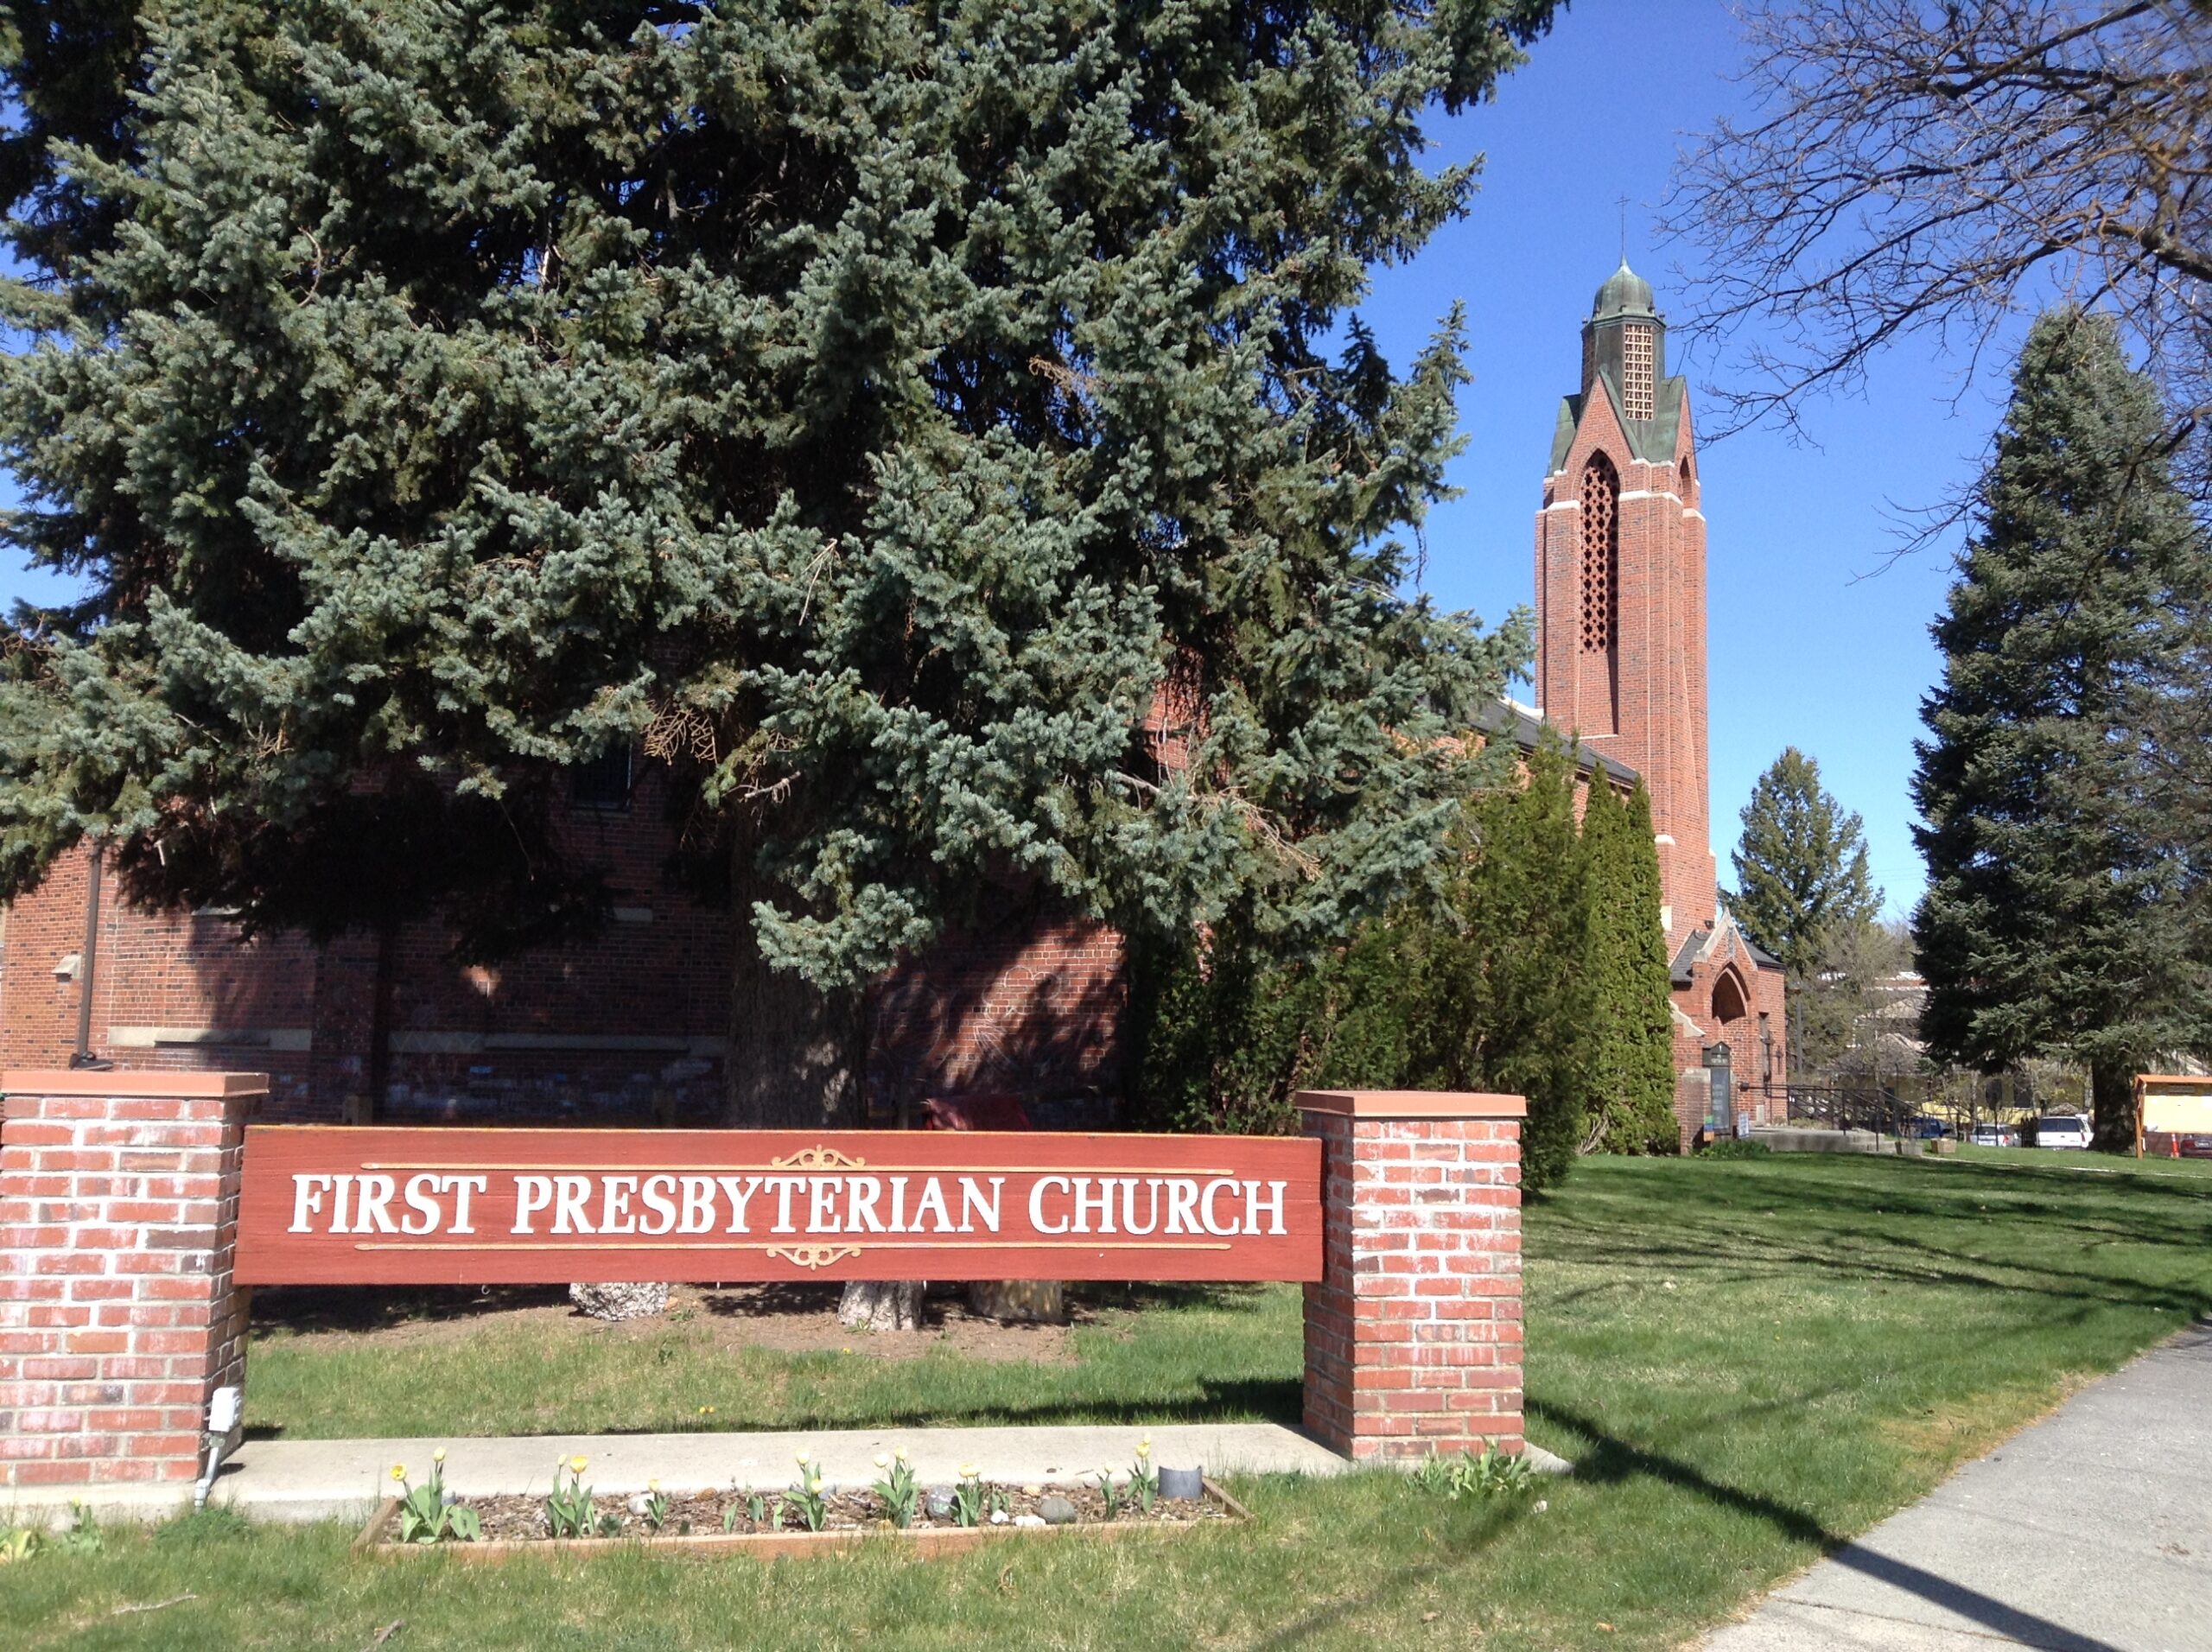 A sign reading "First Presbyterian Church" with the church steeple visible in the background.